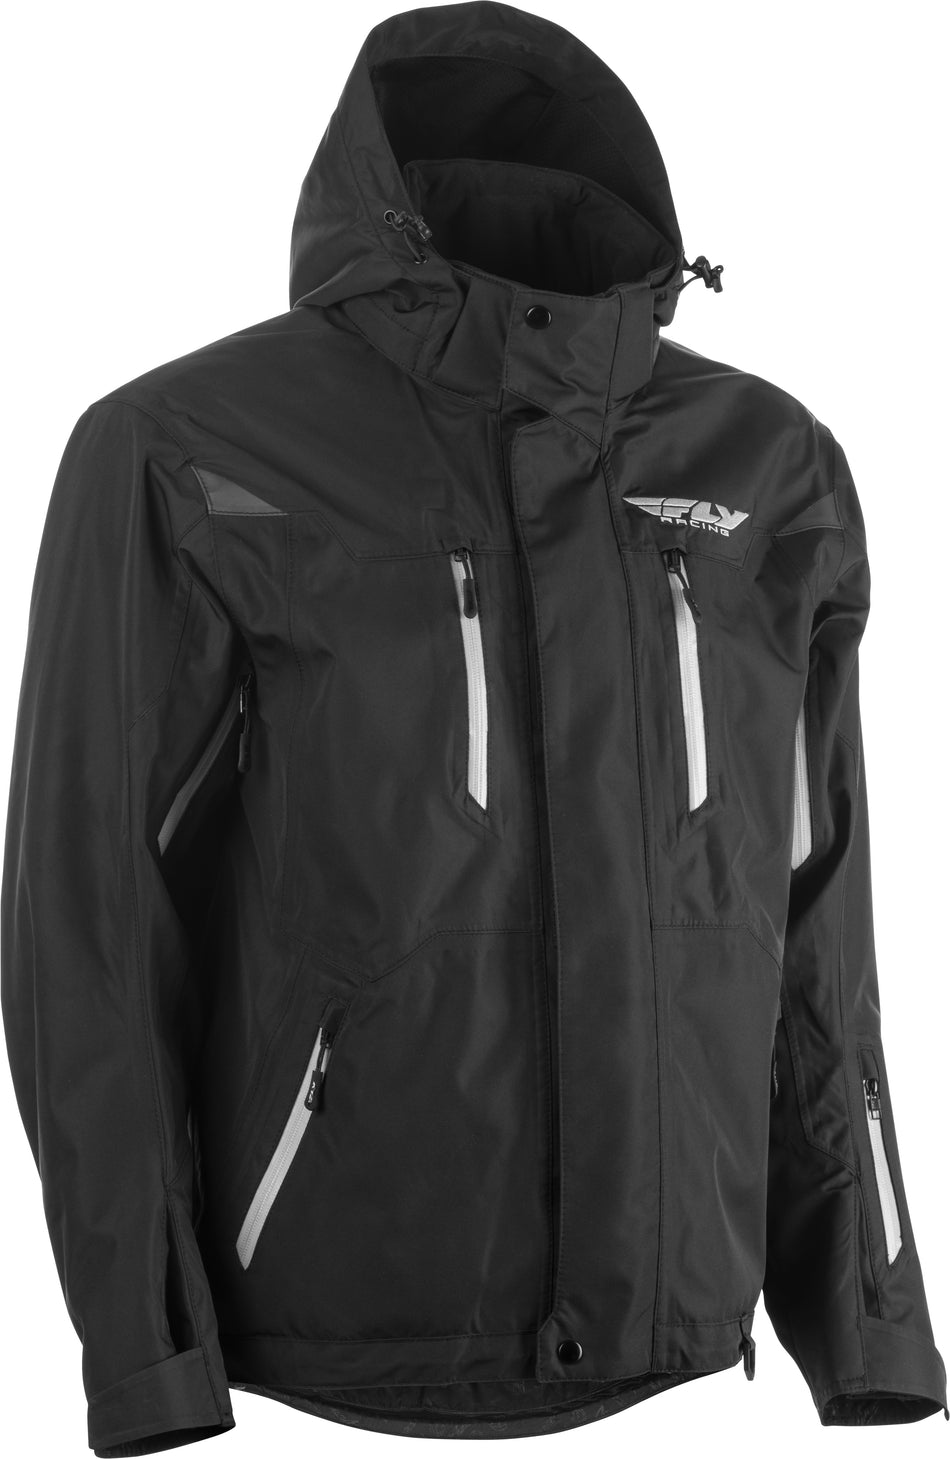 FLY RACING Fly Incline Jacket Black 3x 470-41003X